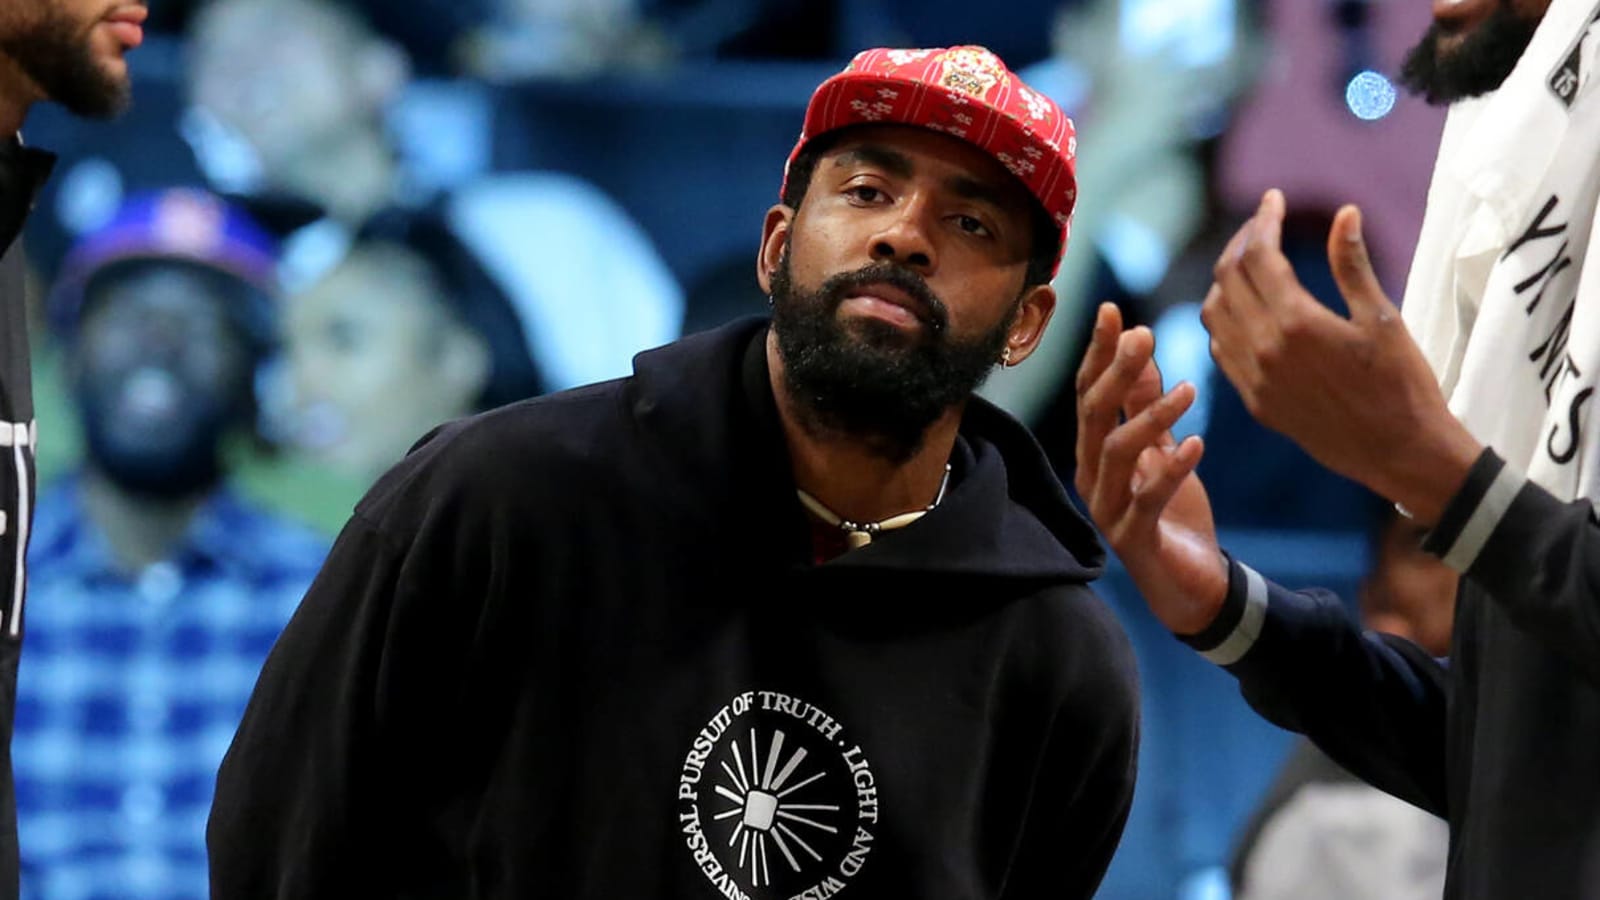 Nets star Kyrie Irving has a new role: Doula